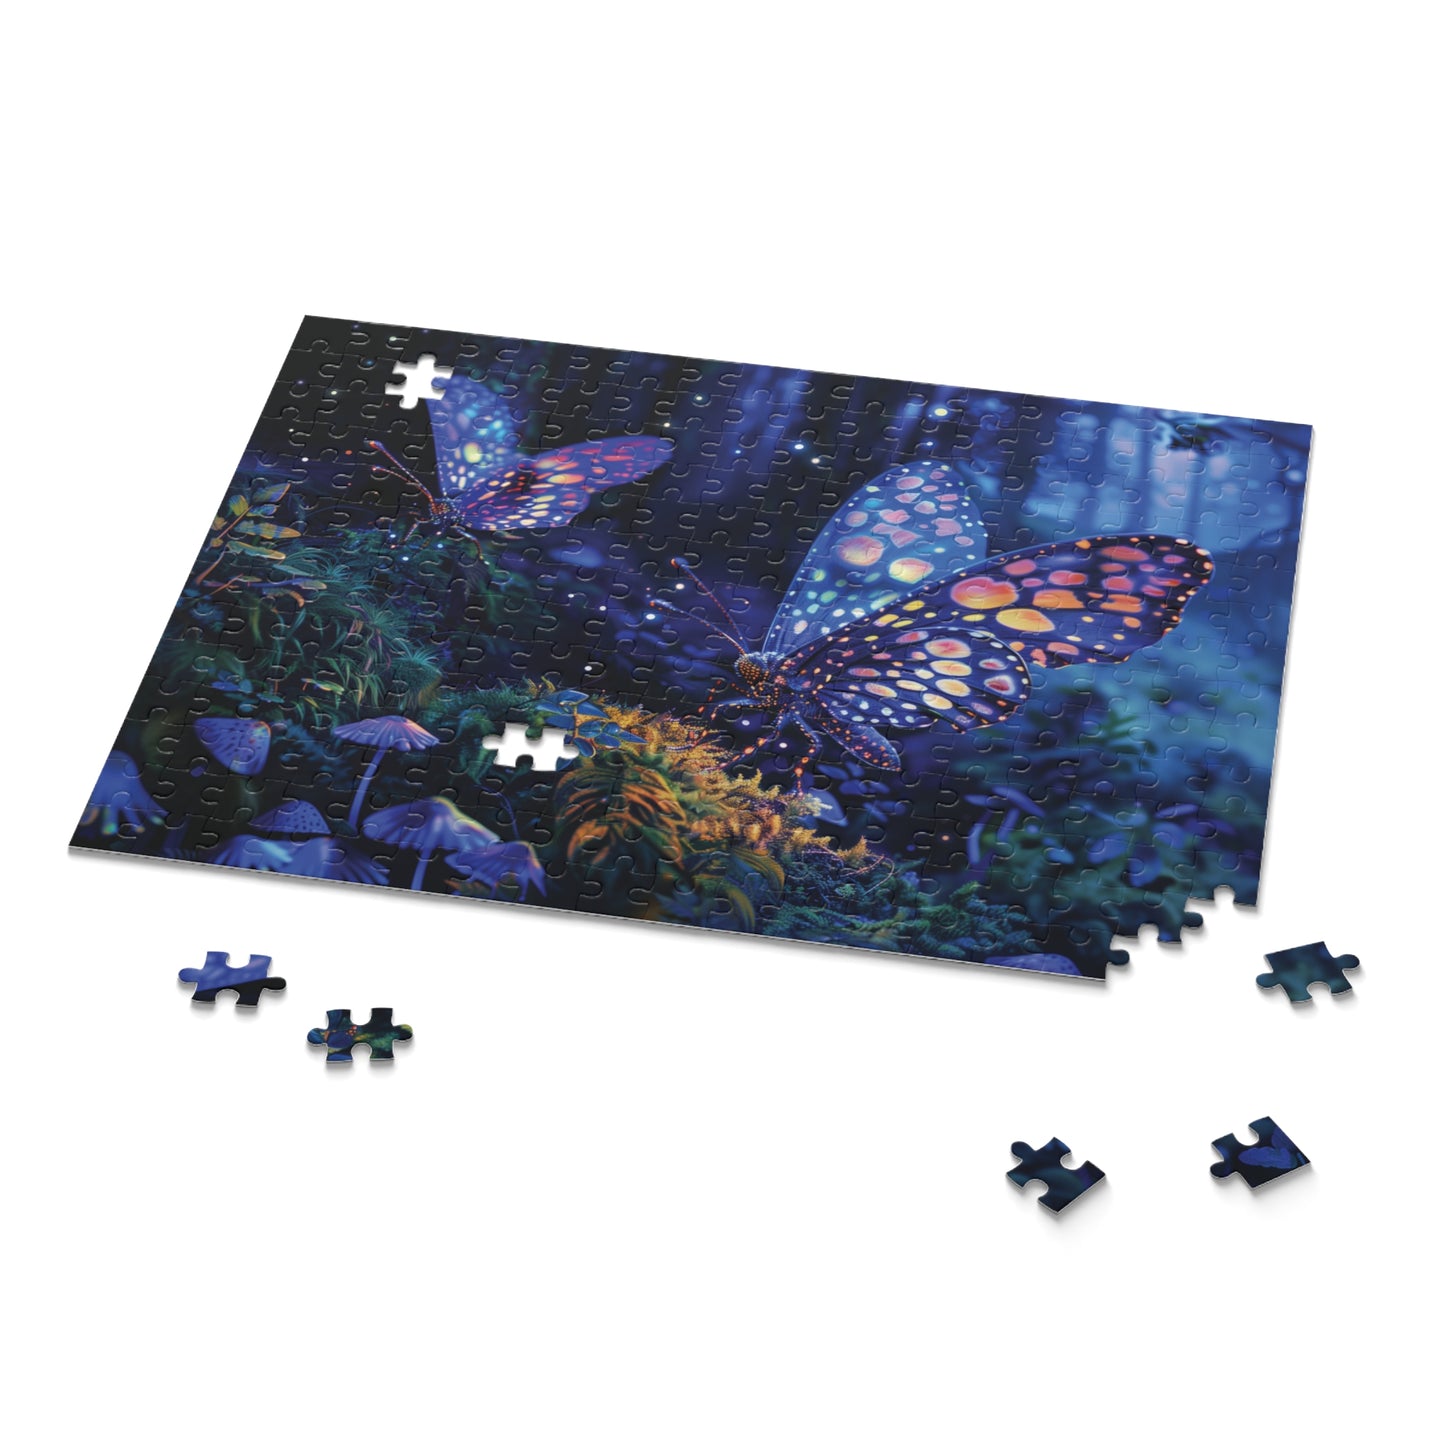 Butterfly Puzzle, Moth Jigsaw Puzzle, Beautiful Painting Puzzle, Artistic Puzzle, 120 pieces, 252 pieces, 500 pieces, Family Game